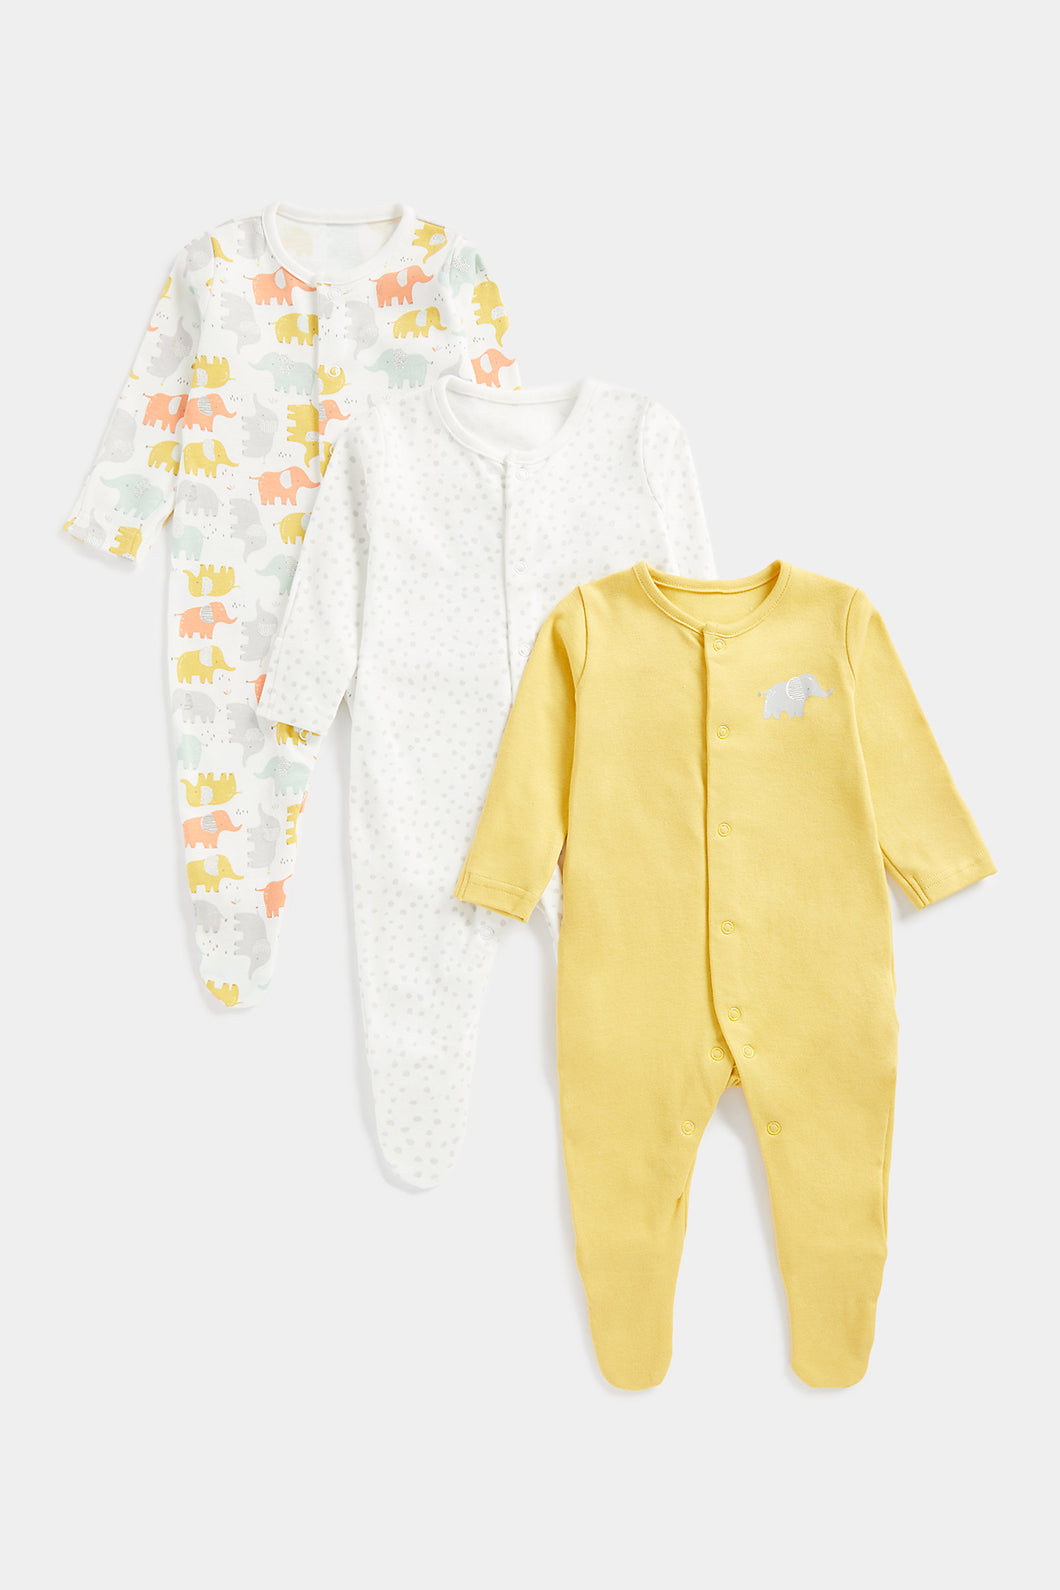 Mothercare Little Elephant Sleepsuits - 3 Pack